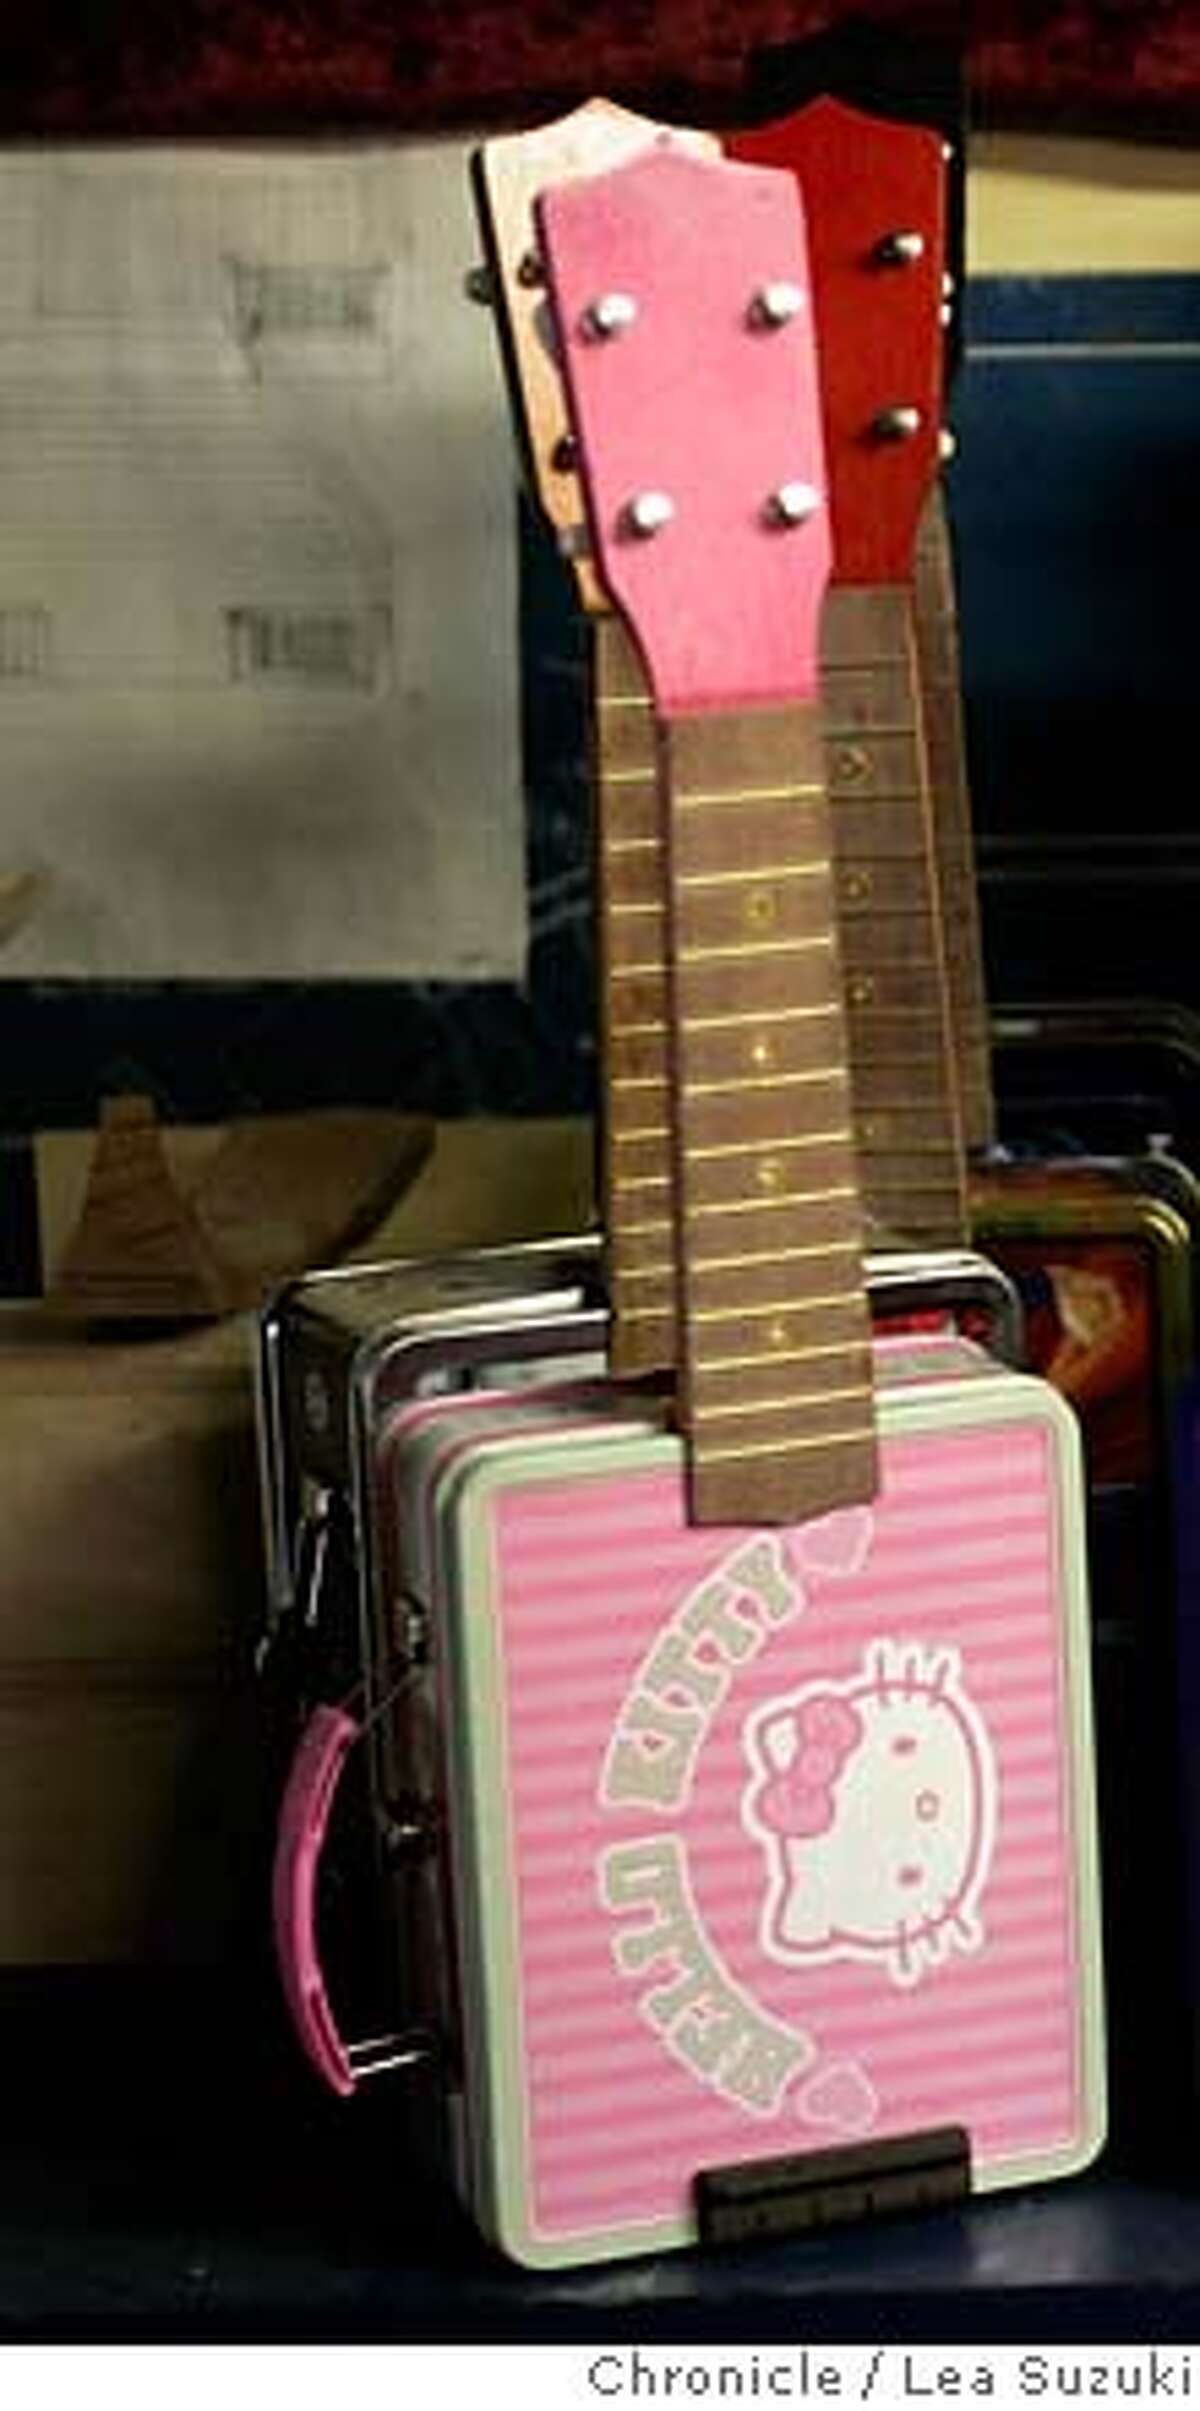 ukelele_064_ls.JPG A set of Lunchbox-A-Leles ready to be strung, tuned and sent out. Ukelele Ray, who makes ukeleles out of lunchboxes, in his ukelele museum and the ukelele workshop in Ray's garage in San Francisco on Monday November 20, 2006. Photo by Lea Suzuki/The San Francisco Chronicle Photo taken on 11/20/06, in San Francisco, CA. **(themselves) cq. MANDATORY CREDIT FOR PHOTOG AND SAN FRANCISCO CHRONICLE/NO SALES-MAGS OUT